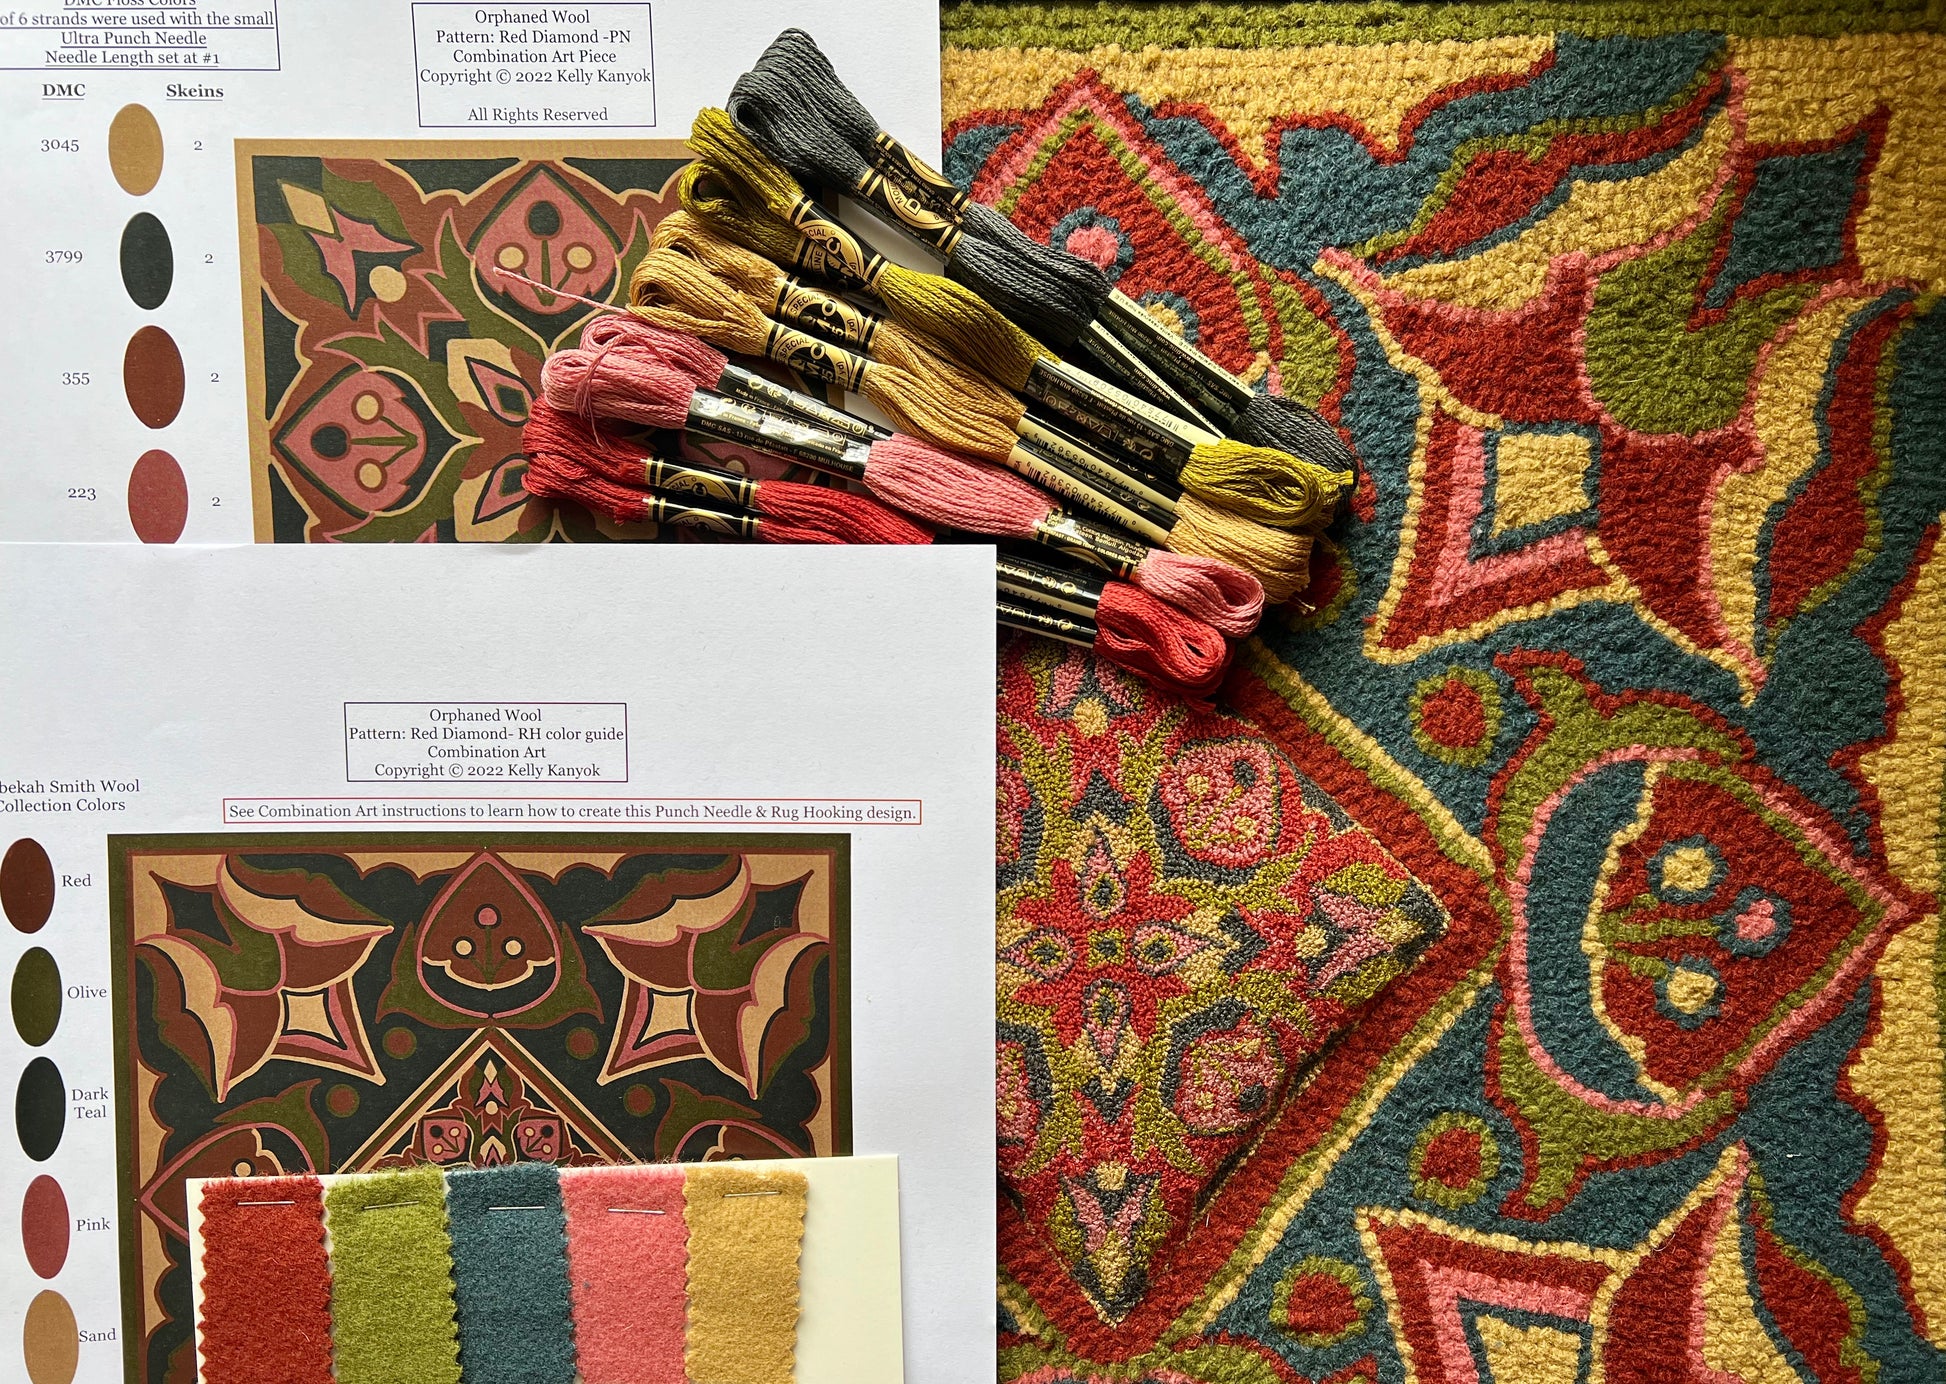 Red Diamond- Rug Hooking and Punch Needle design by Orphaned Wool is a kit designed for the punch needle and rug hooking artist. It is a fantastic kit that gives you all the information needed to create this very unique type of design.